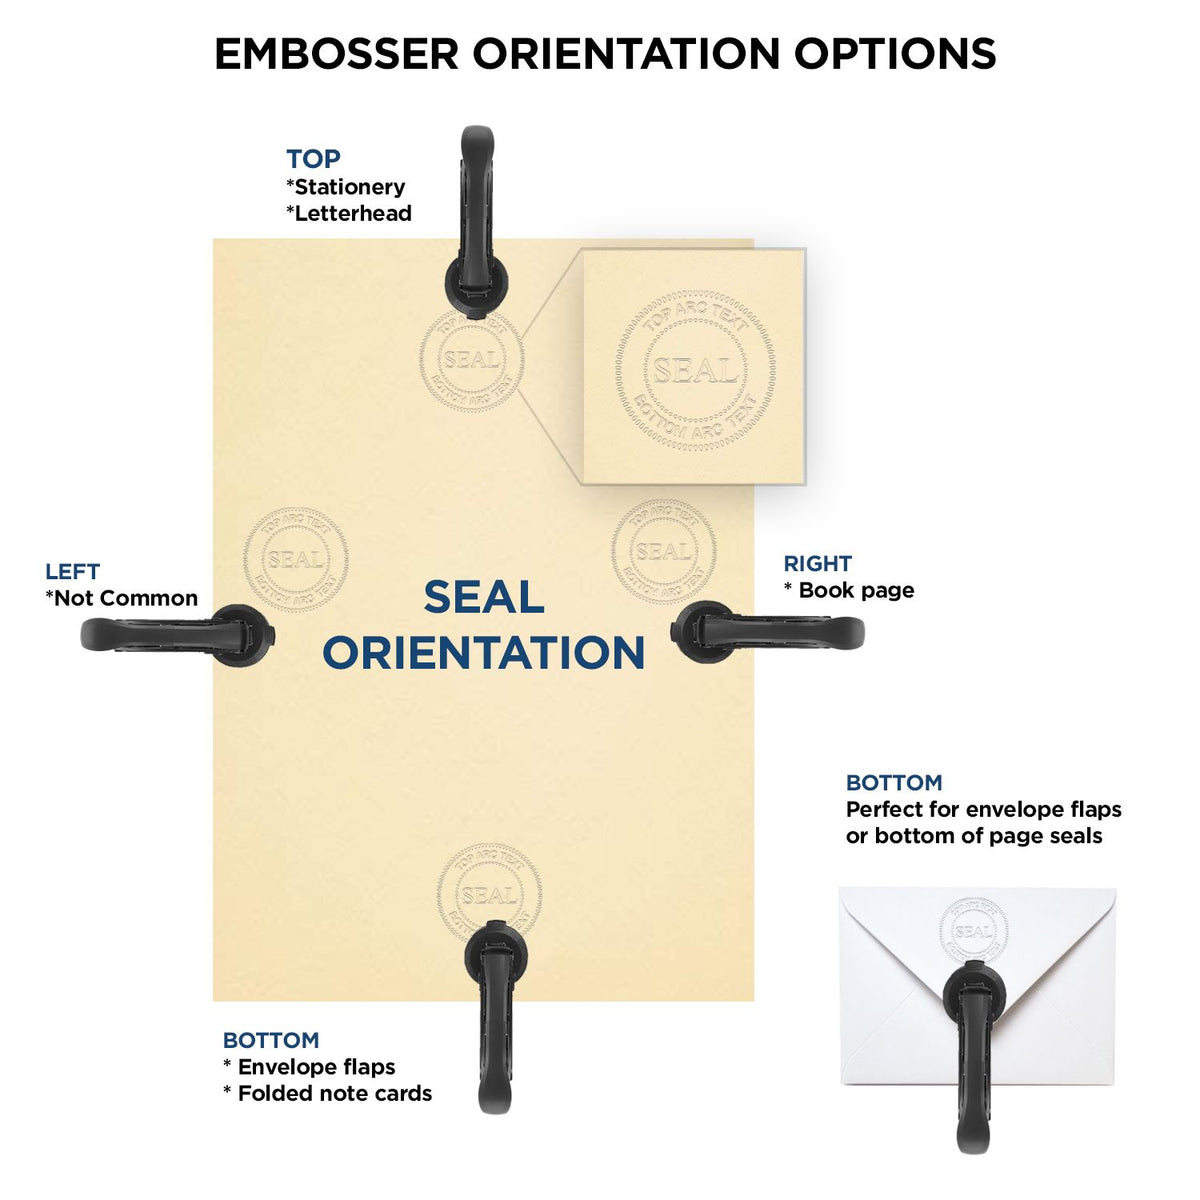 An infographic for the Heavy Duty Cast Iron Missouri Engineer Seal Embosser showing embosser orientation, this is showing examples of a top, bottom, right and left insert.